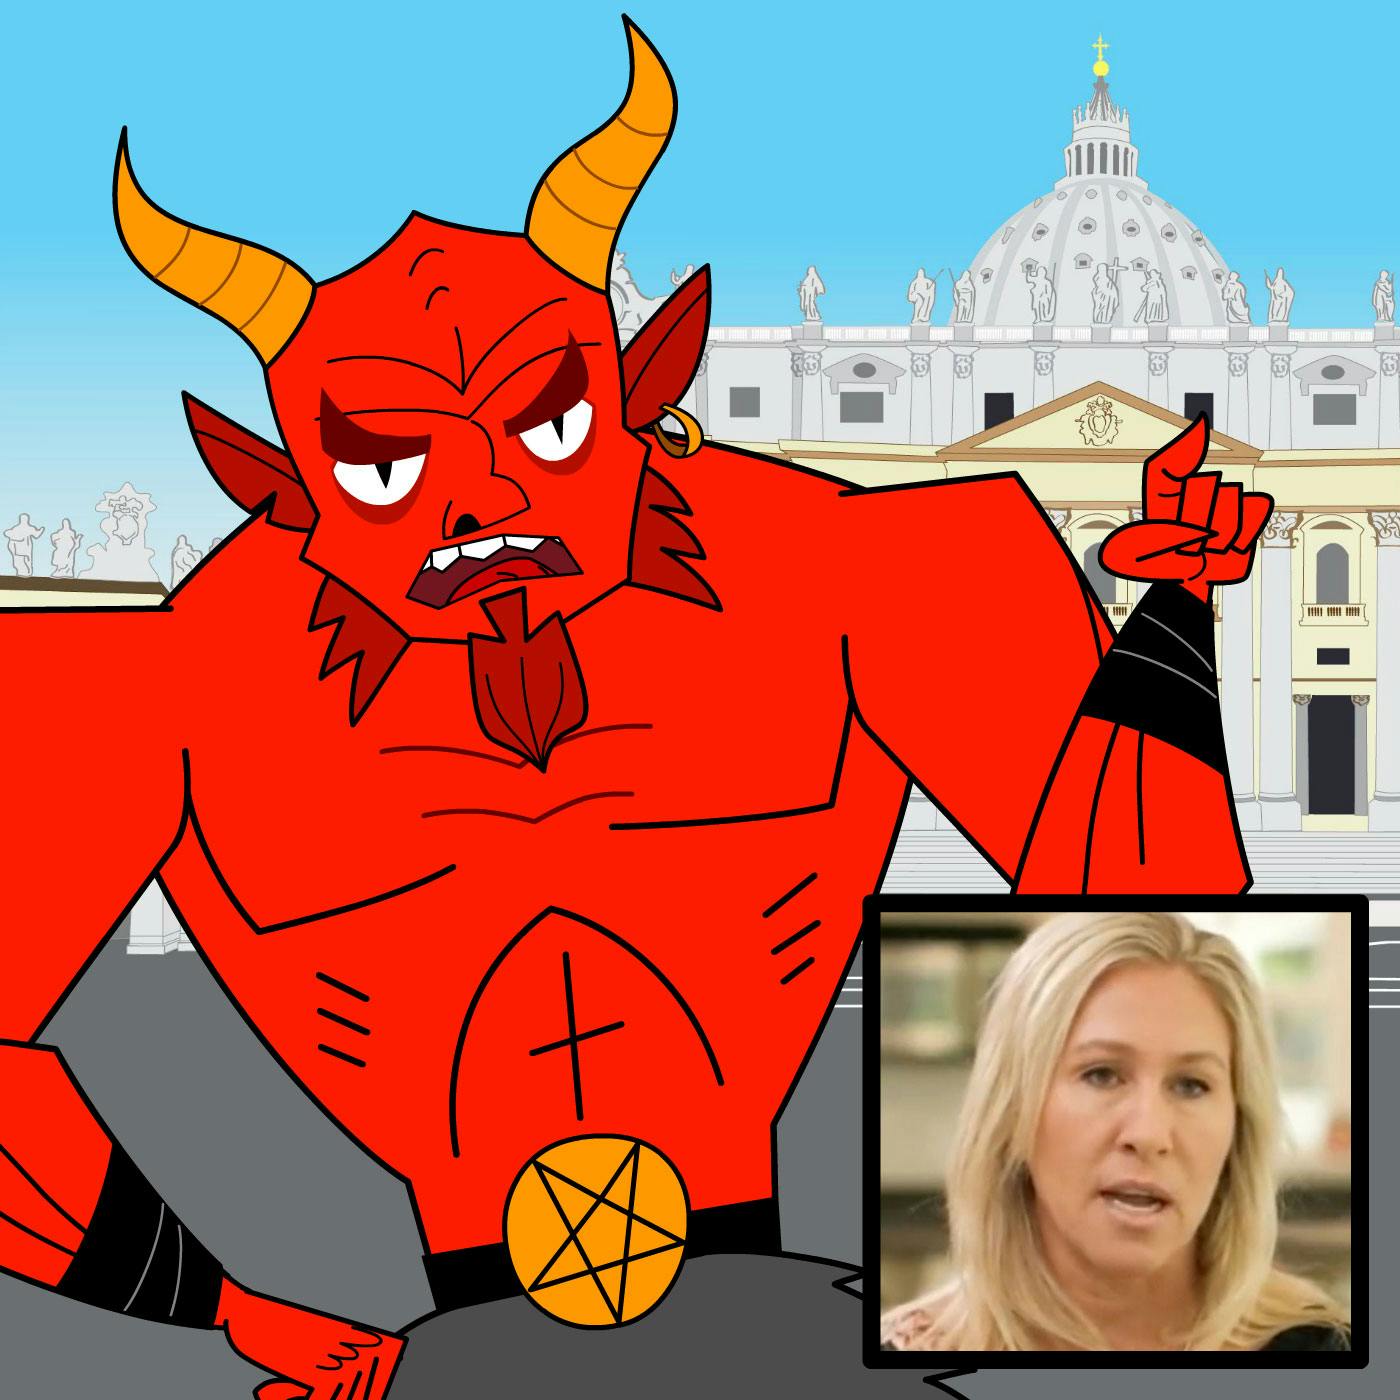 Satan Responds To Accusations From Crazy Person That He Is ‘Controlling The Church’